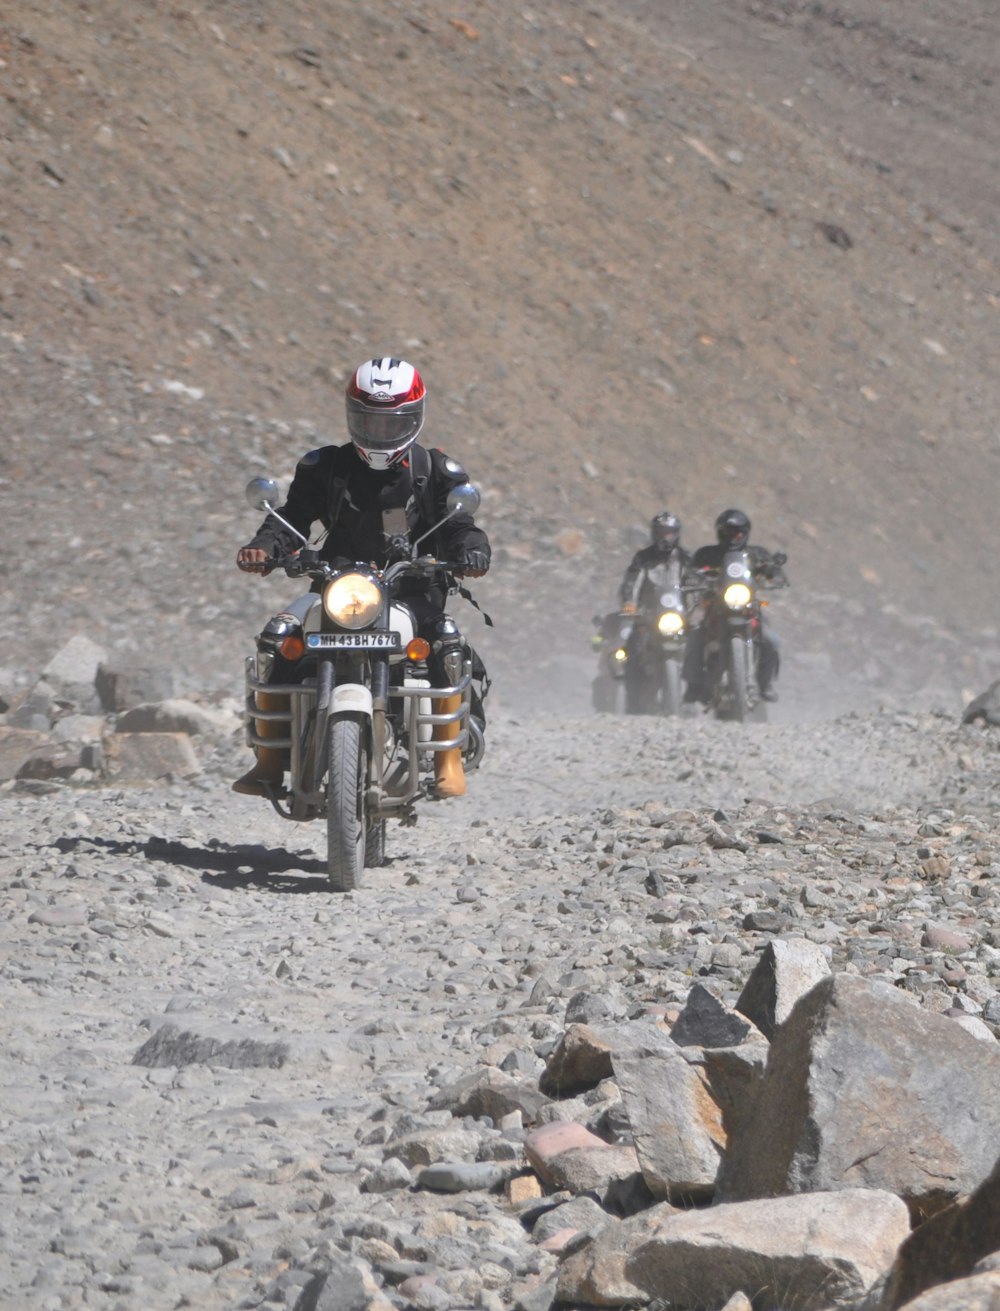 a group of people riding motorcycles on a rocky terrain